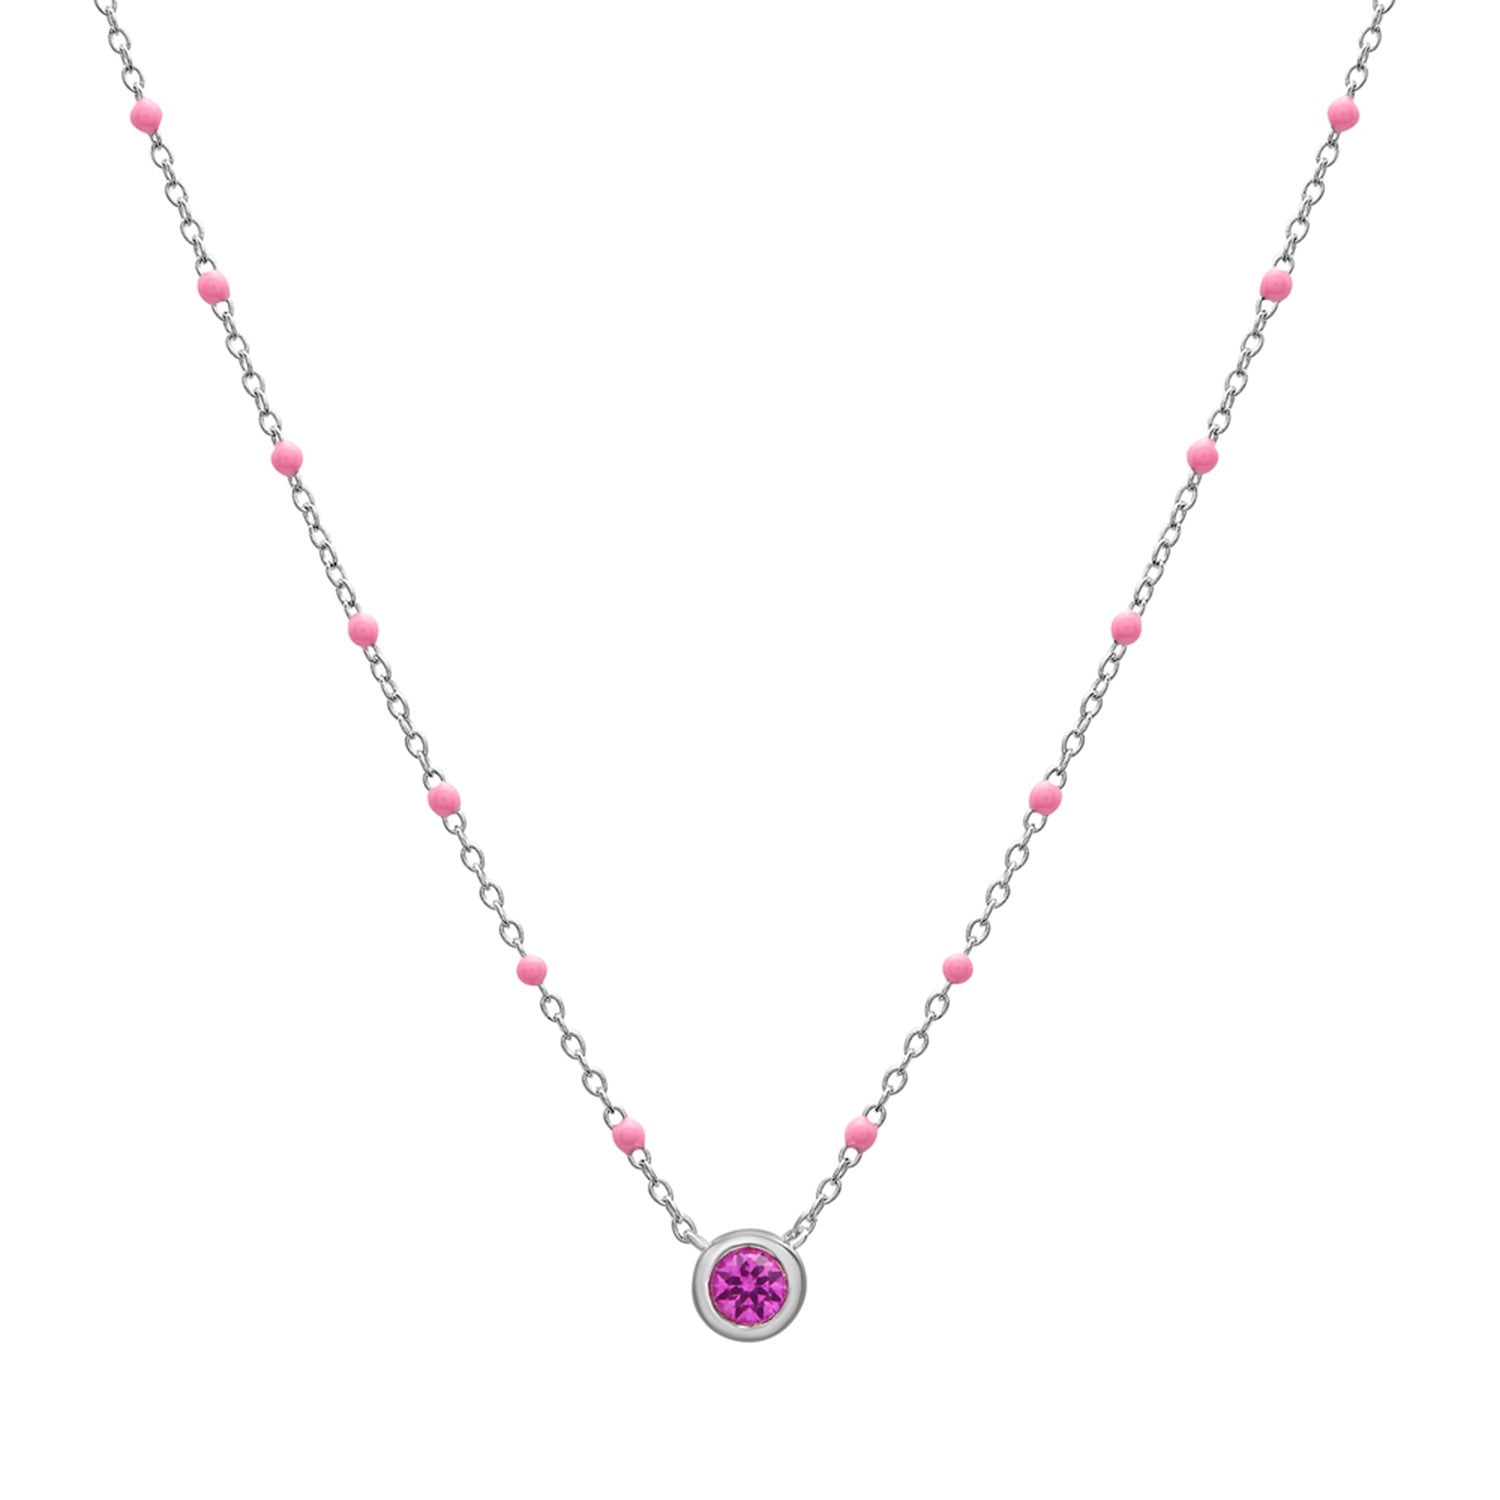 Birthstone Enamel Necklaces in Light Pink stone